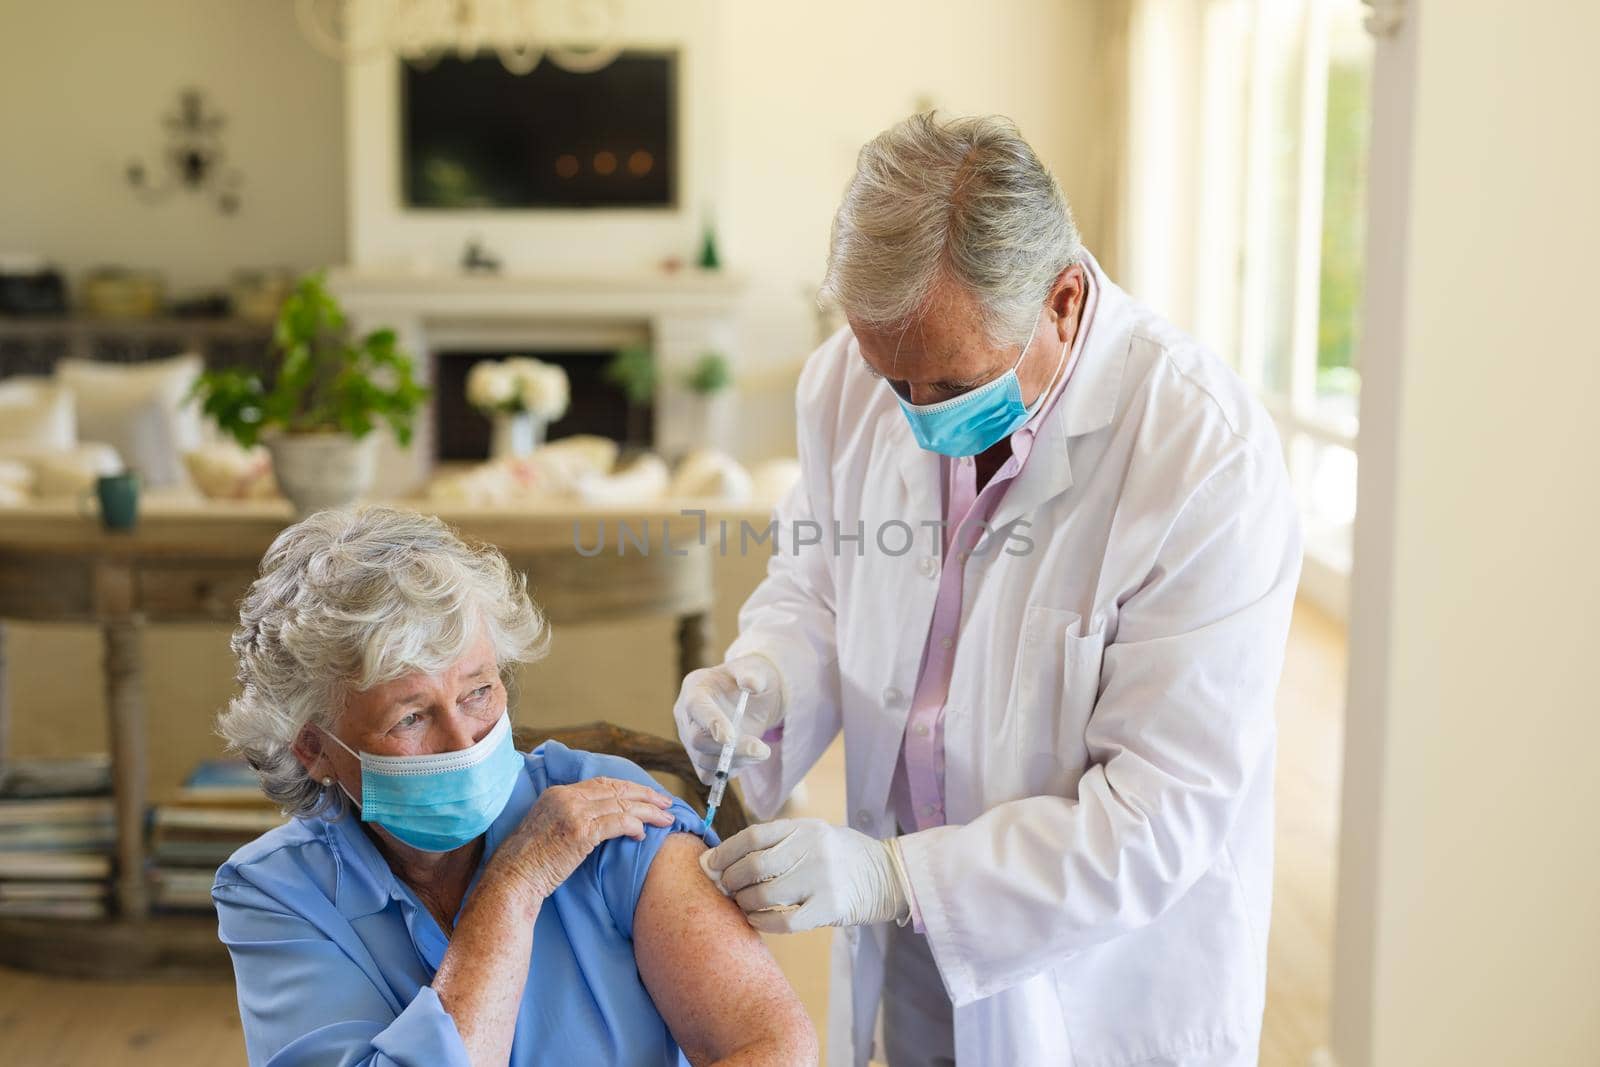 Senior caucasian male doctor vaccinating female patient wearing face masks. medicine and healthcare services during covid 19 pandemic concept.